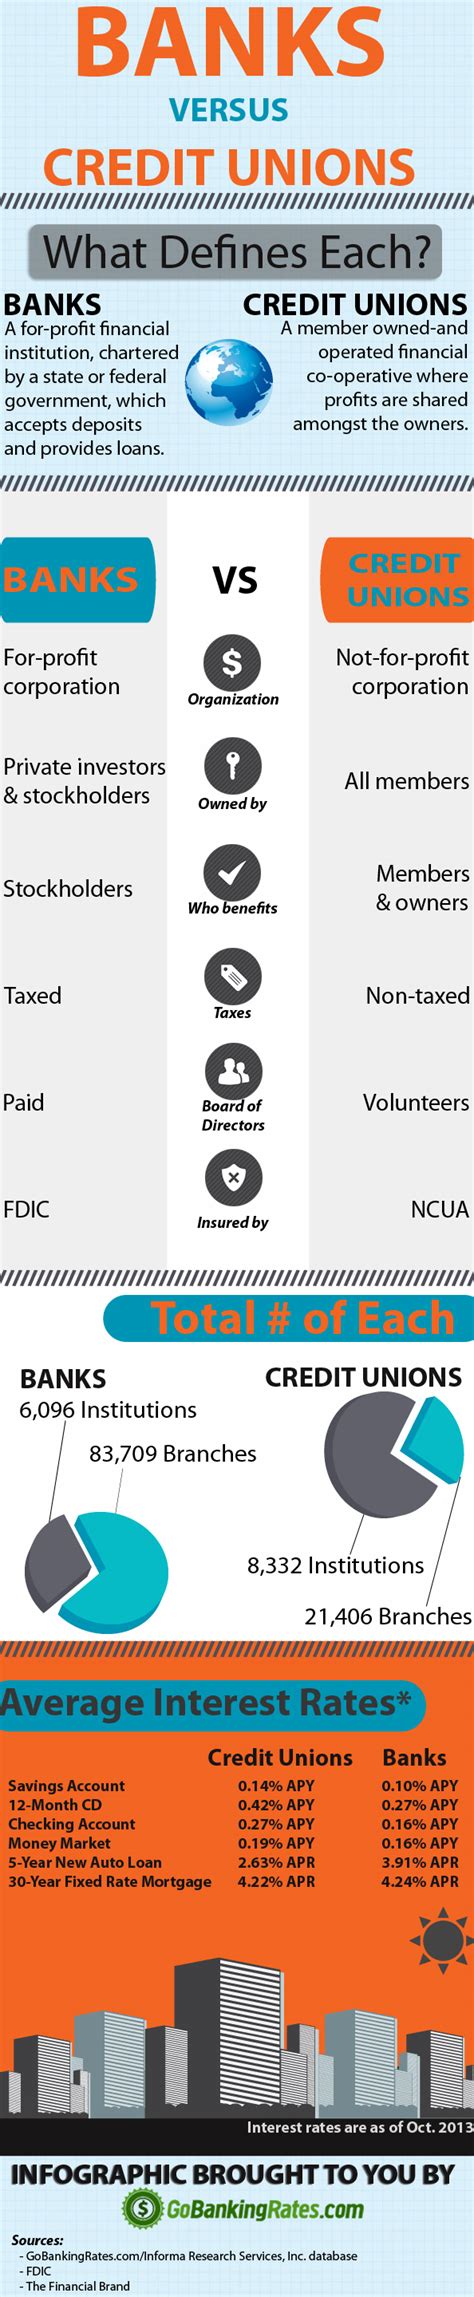 Credit union 1's enhanced online/mobile banking platform is here! Banks vs. Credit Unions: What's the Difference ...